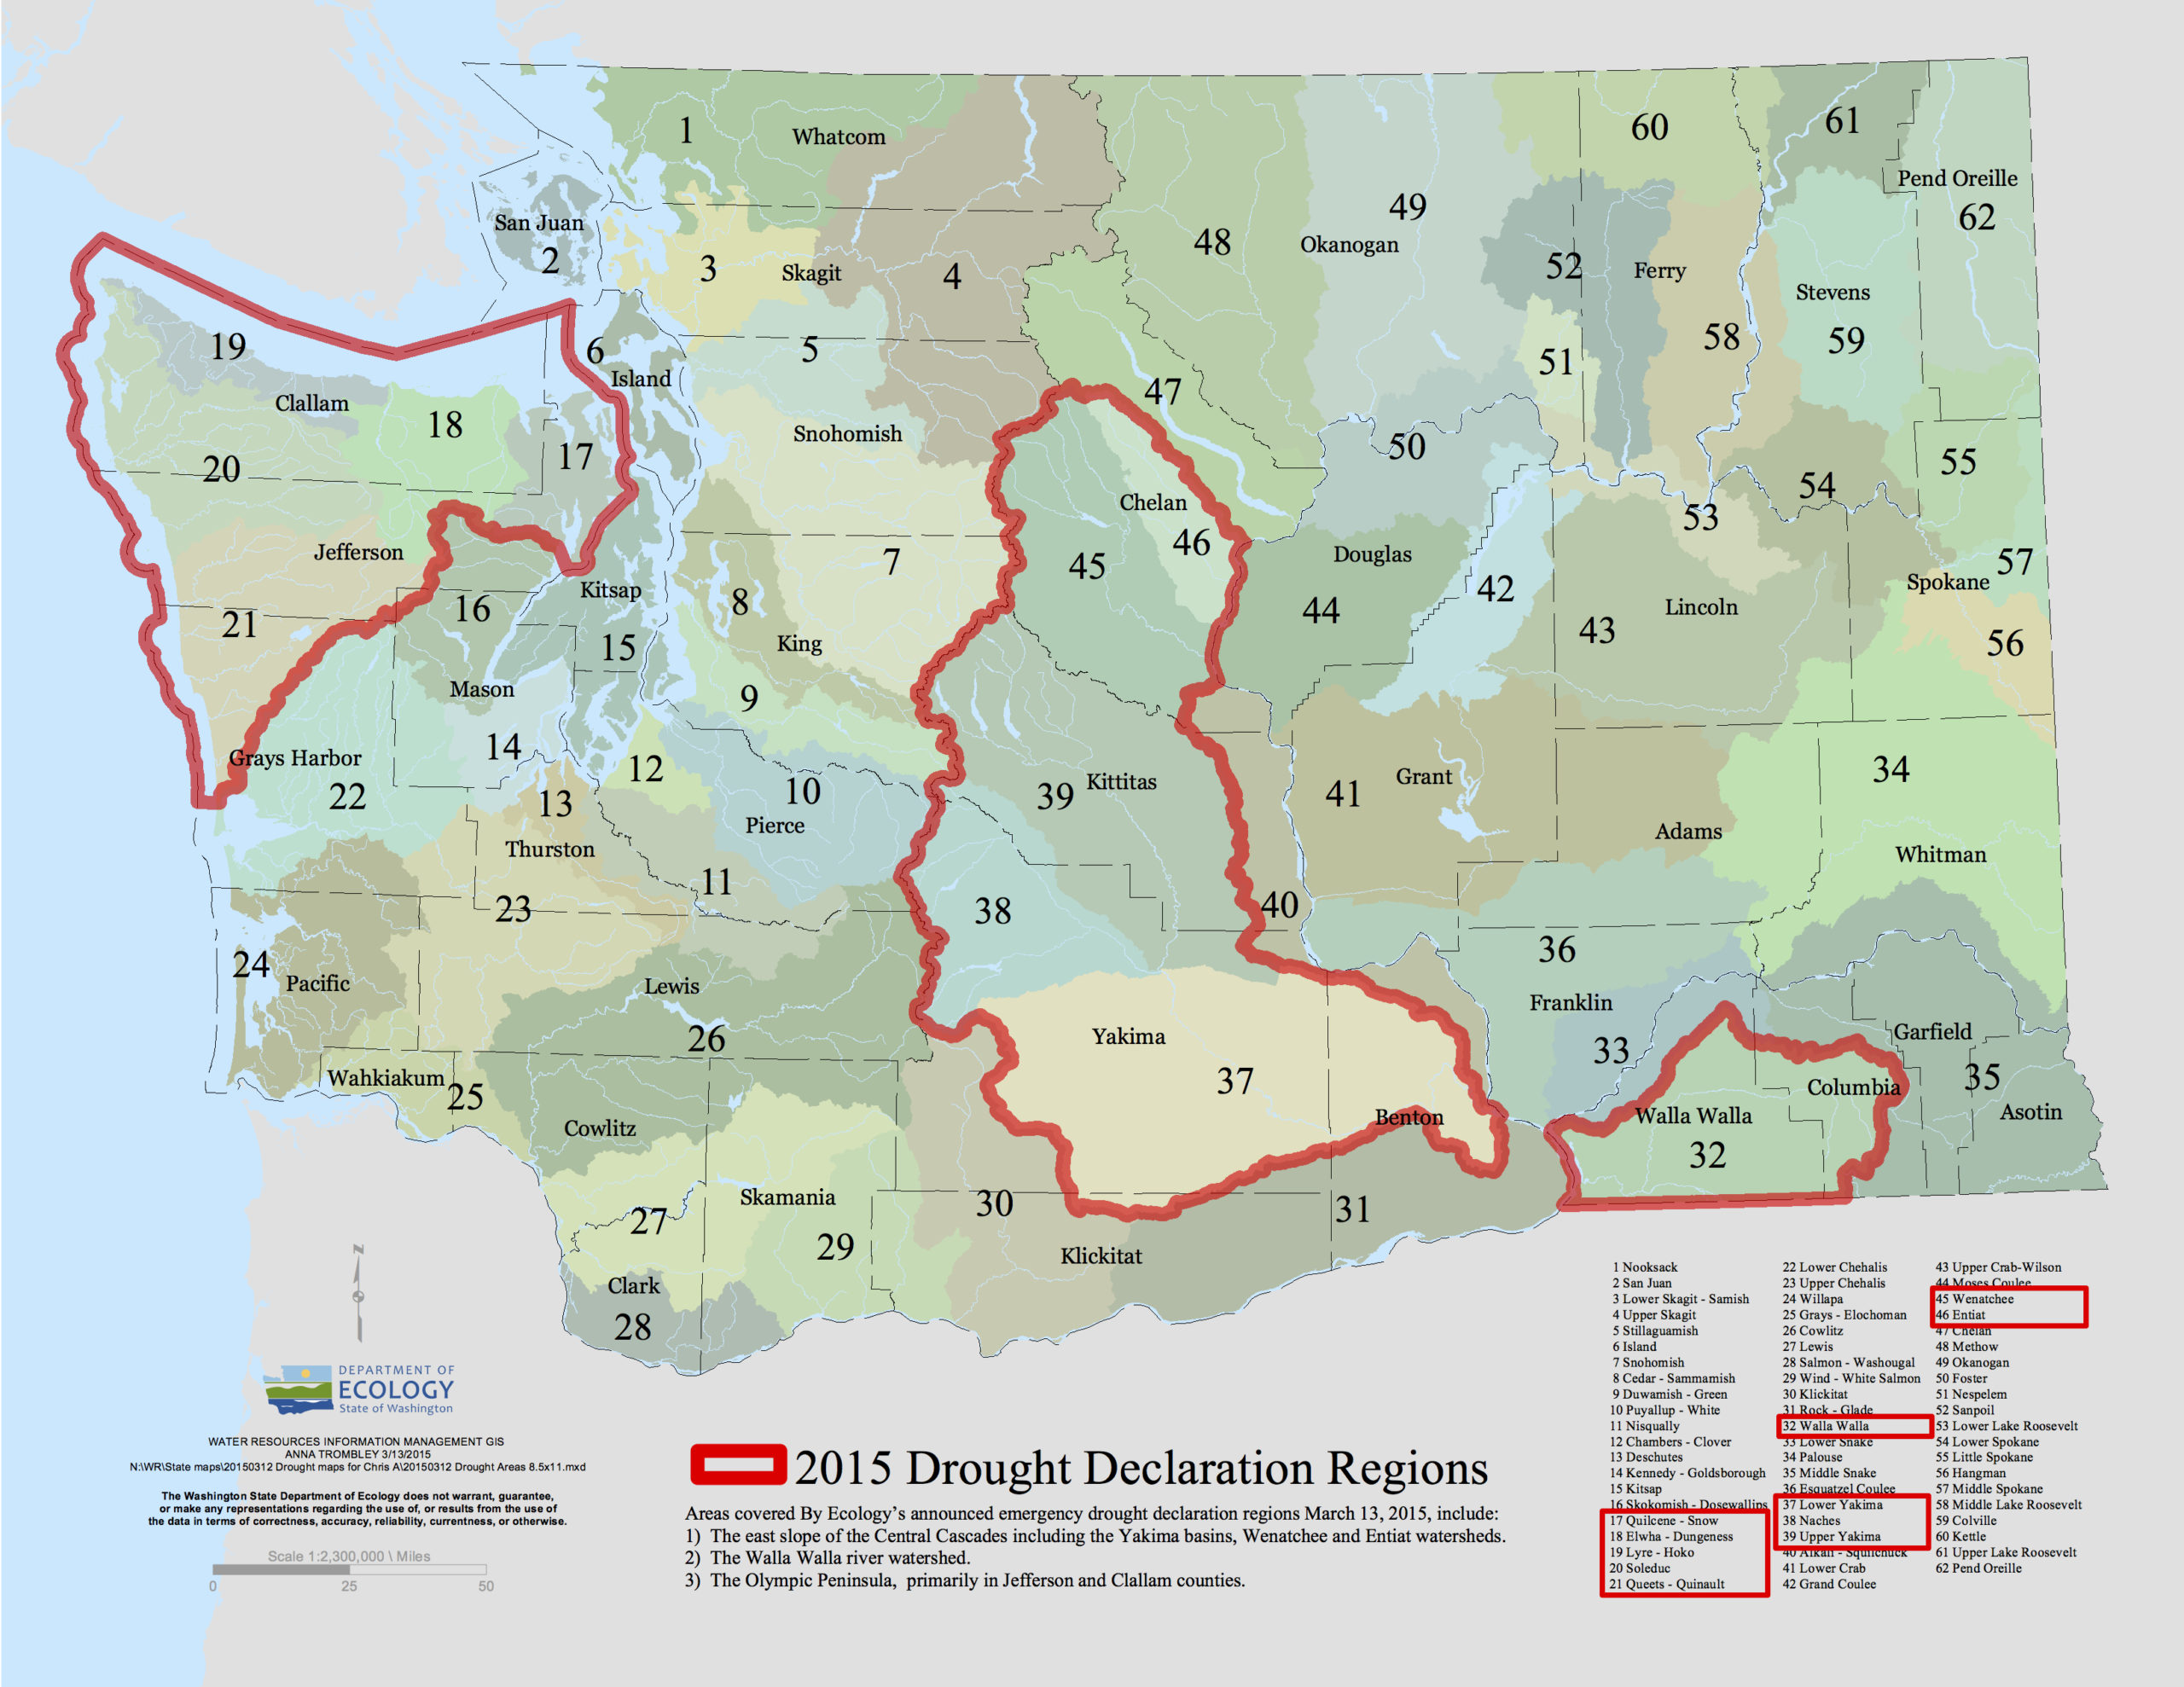 Areas of Washington affected by a 2015 drought emergency declaration. (Department of Ecology)